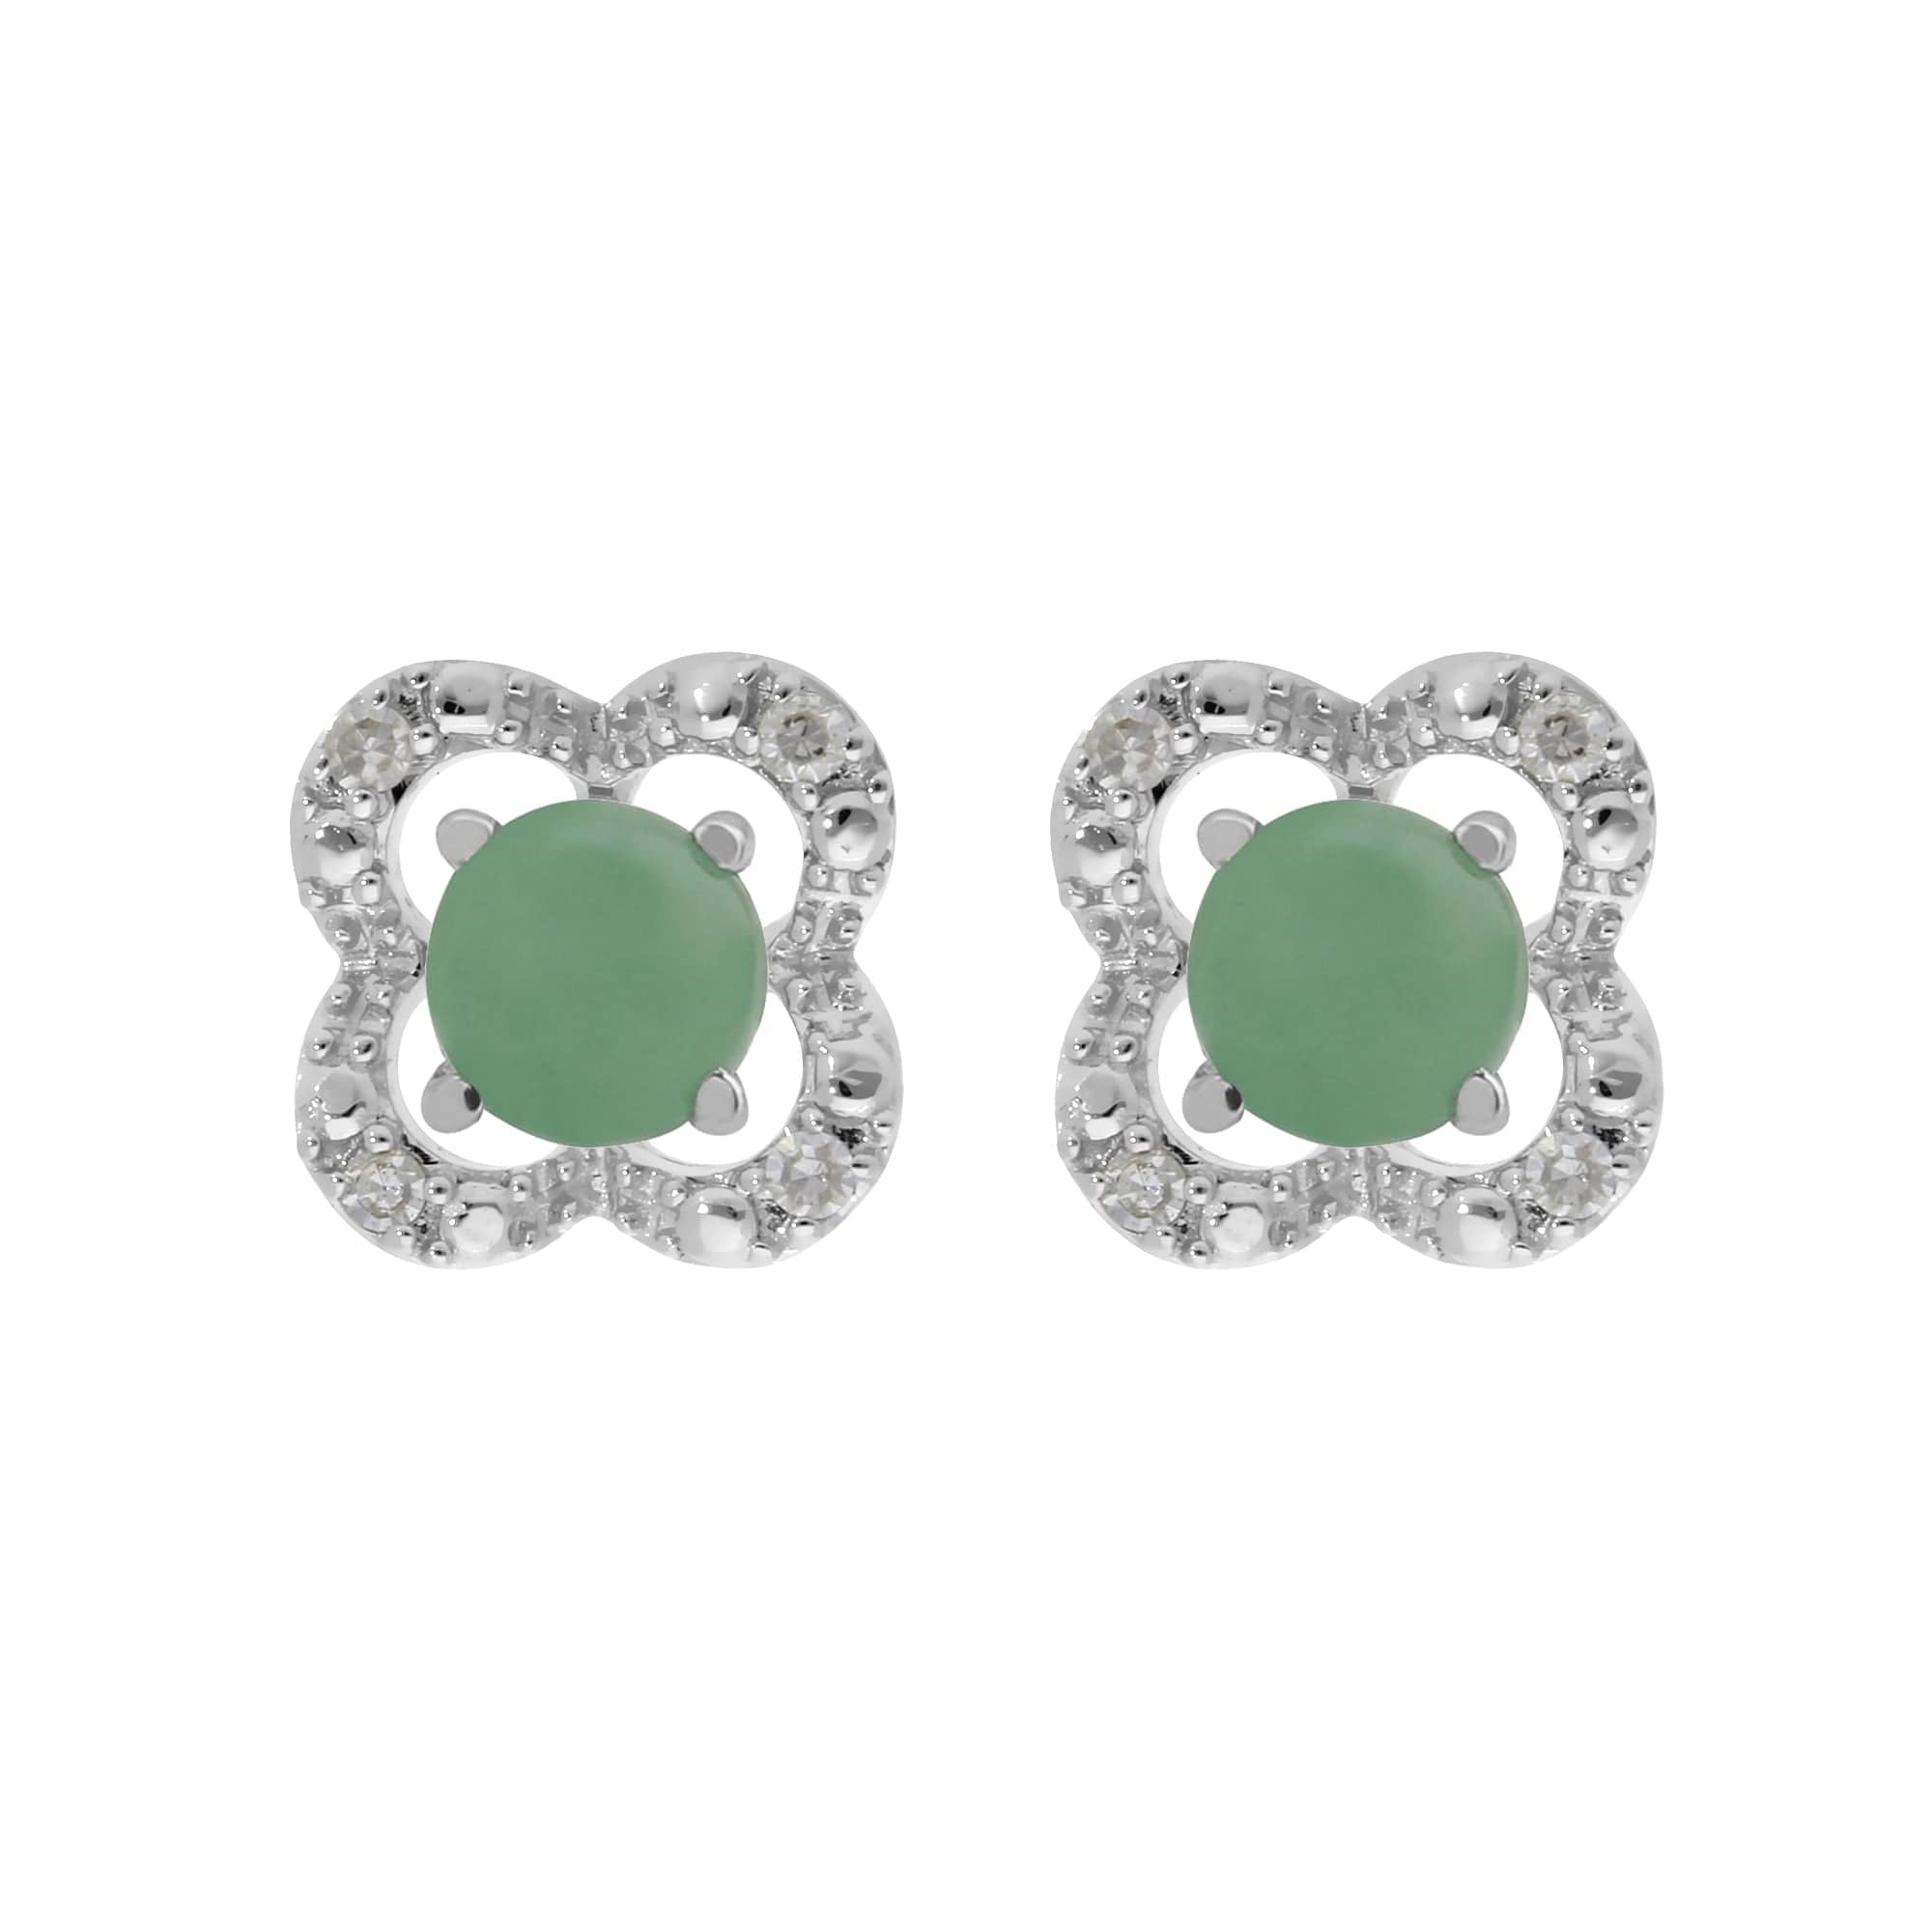 162E0071149-162E0244019 Classic Round Jade Stud Earrings with Detachable Diamond Flower Ear Jacket in 9ct White Gold 1